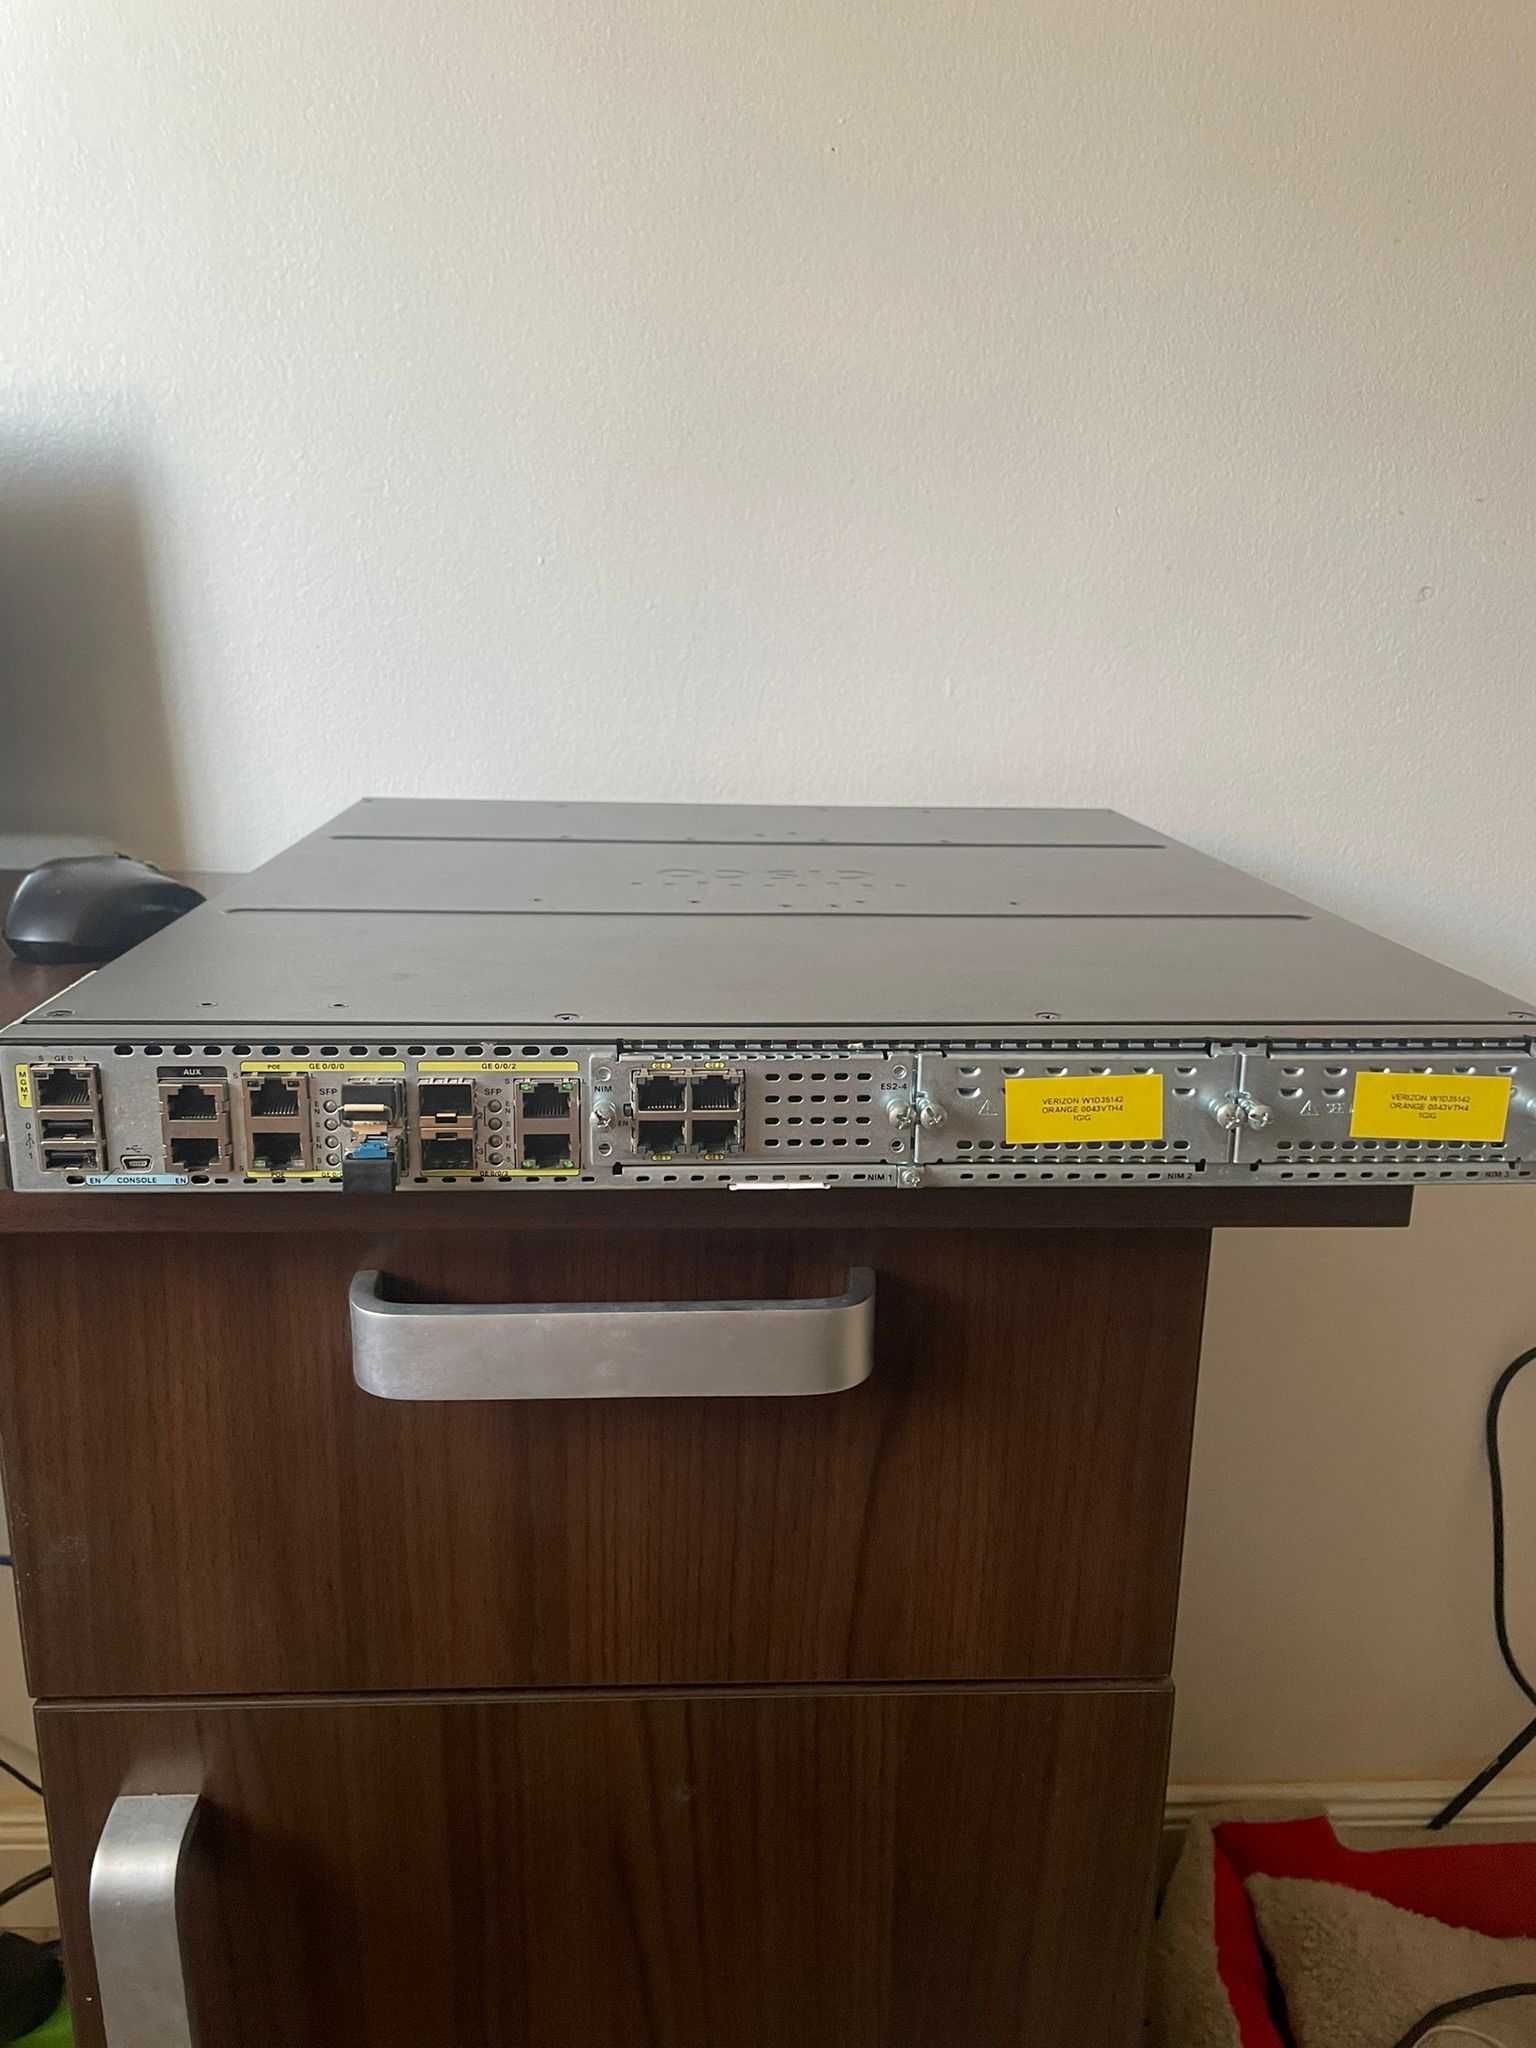 Cisco ISR4431/k9 Integrated Services Router